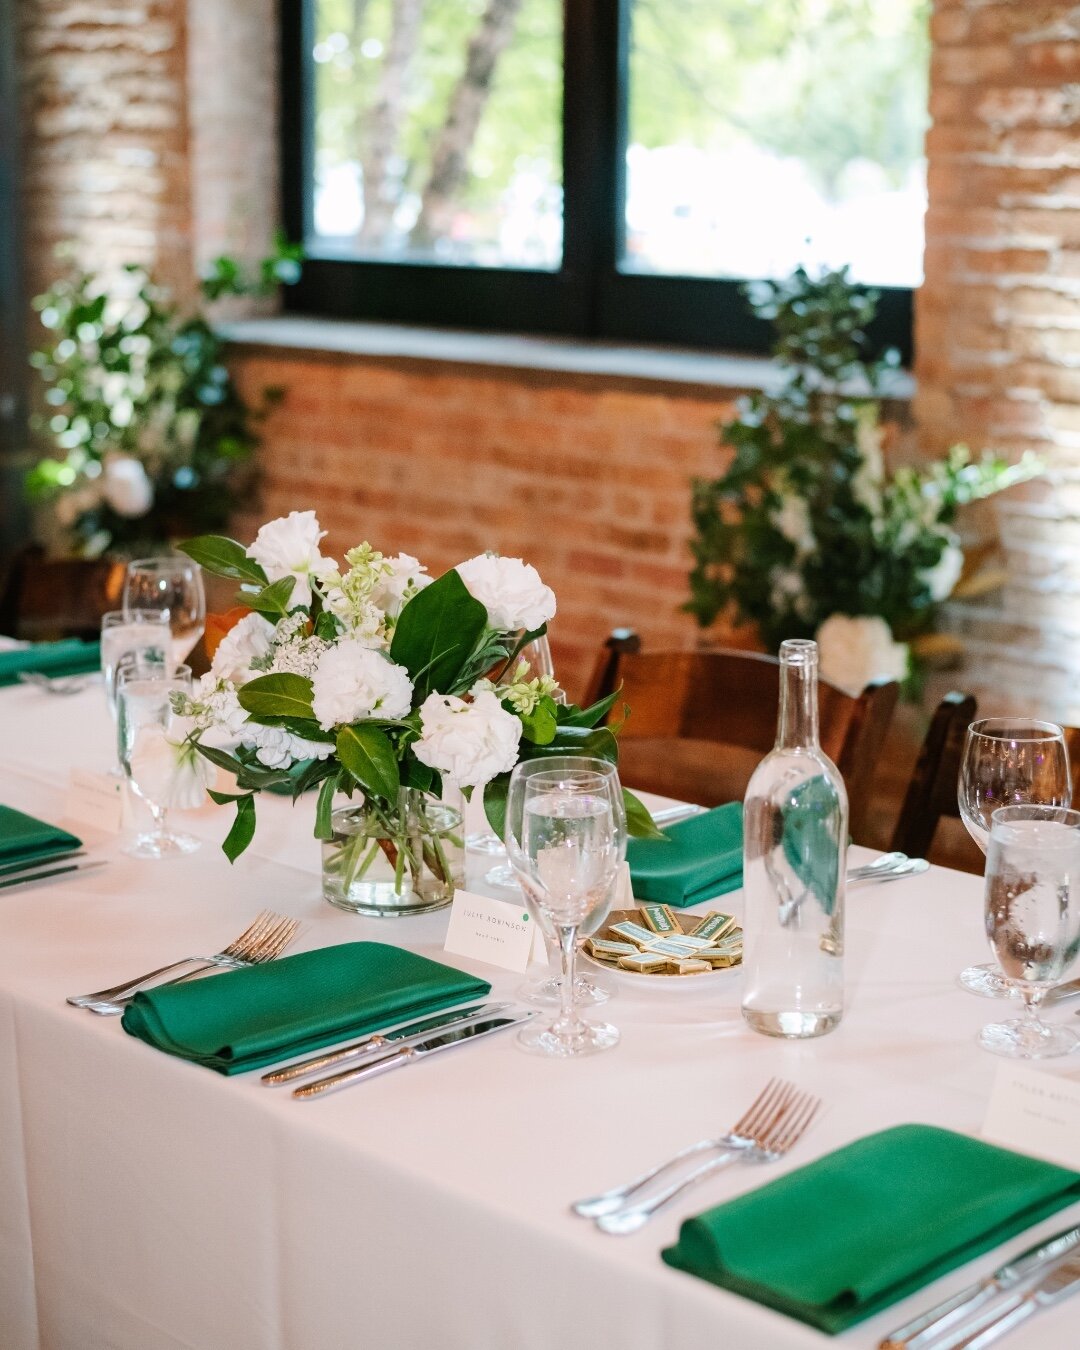 Absolutely smitten with all things green 💚✨

📸 @edandaileenphotography
.
.
.
#lacunaevents #lacunalofts #chicagoeventvenue #tablescapeinspiration #weddingvenue #chicagowedding #weddingdecor #weddingdesign #eventdecor #eventdesign #realwedding #drea